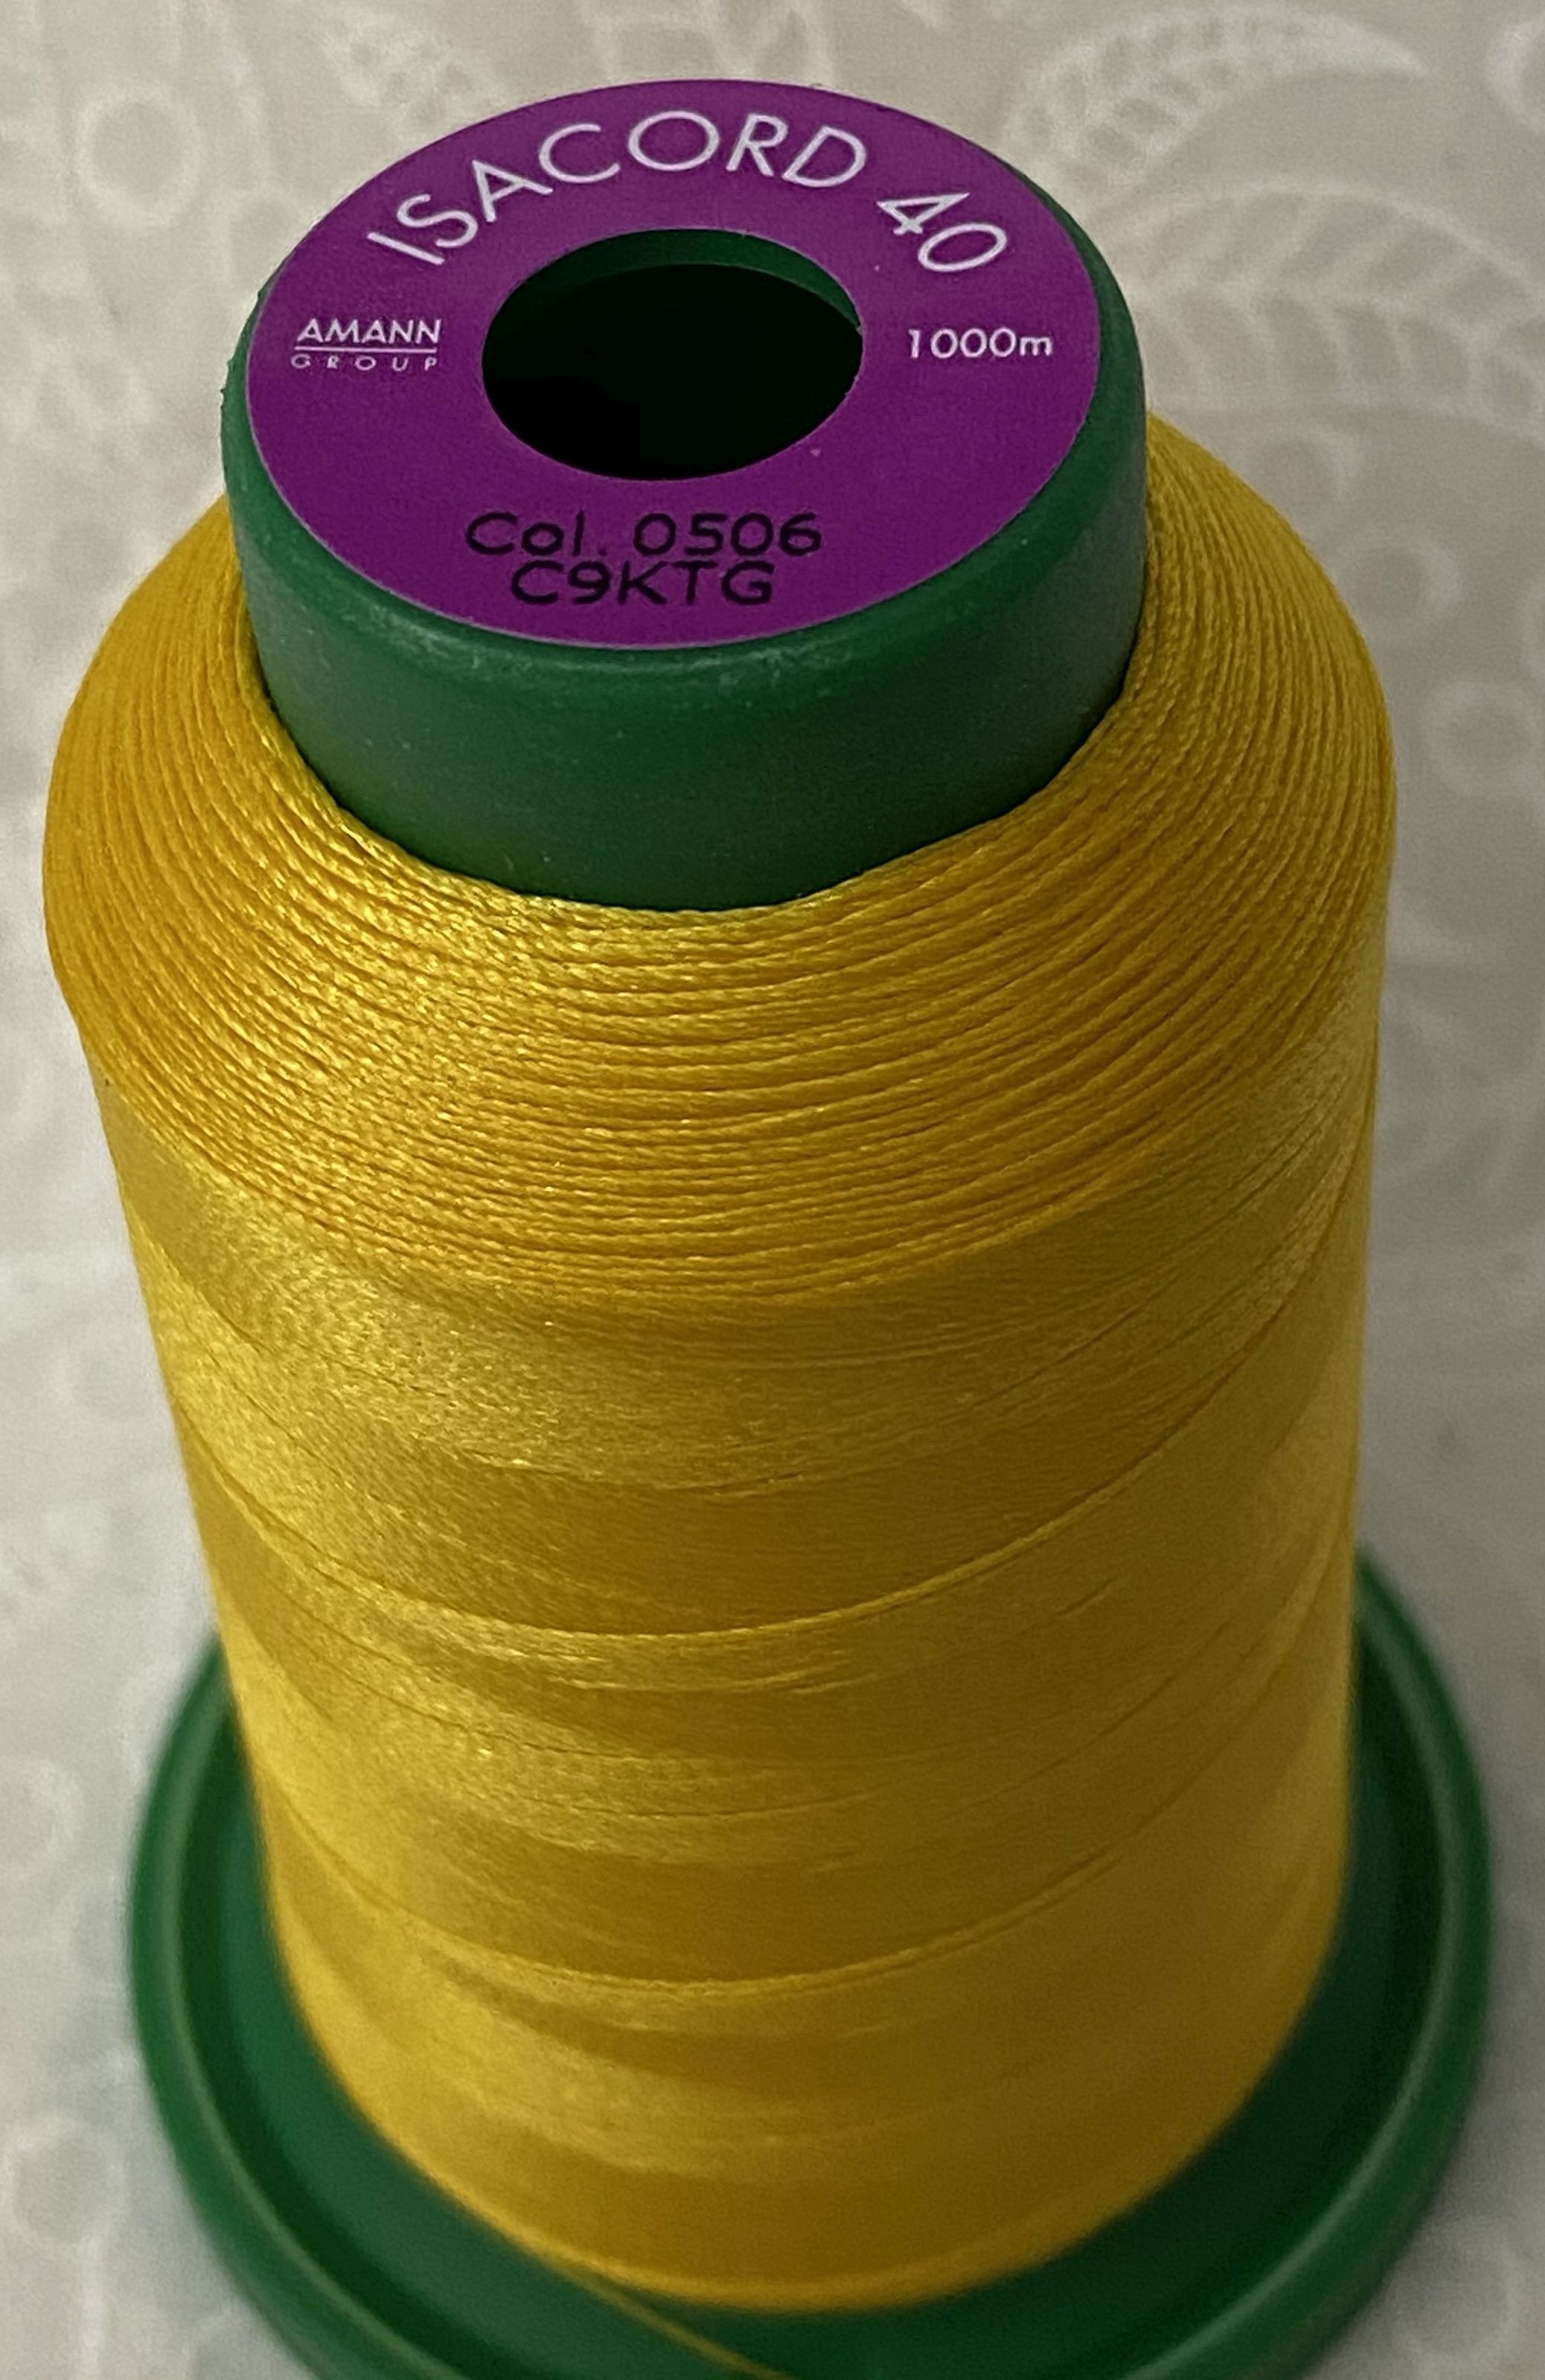 0506 Yellow Bird - Isacord Embroidery Thread - 1000m - 762303551114